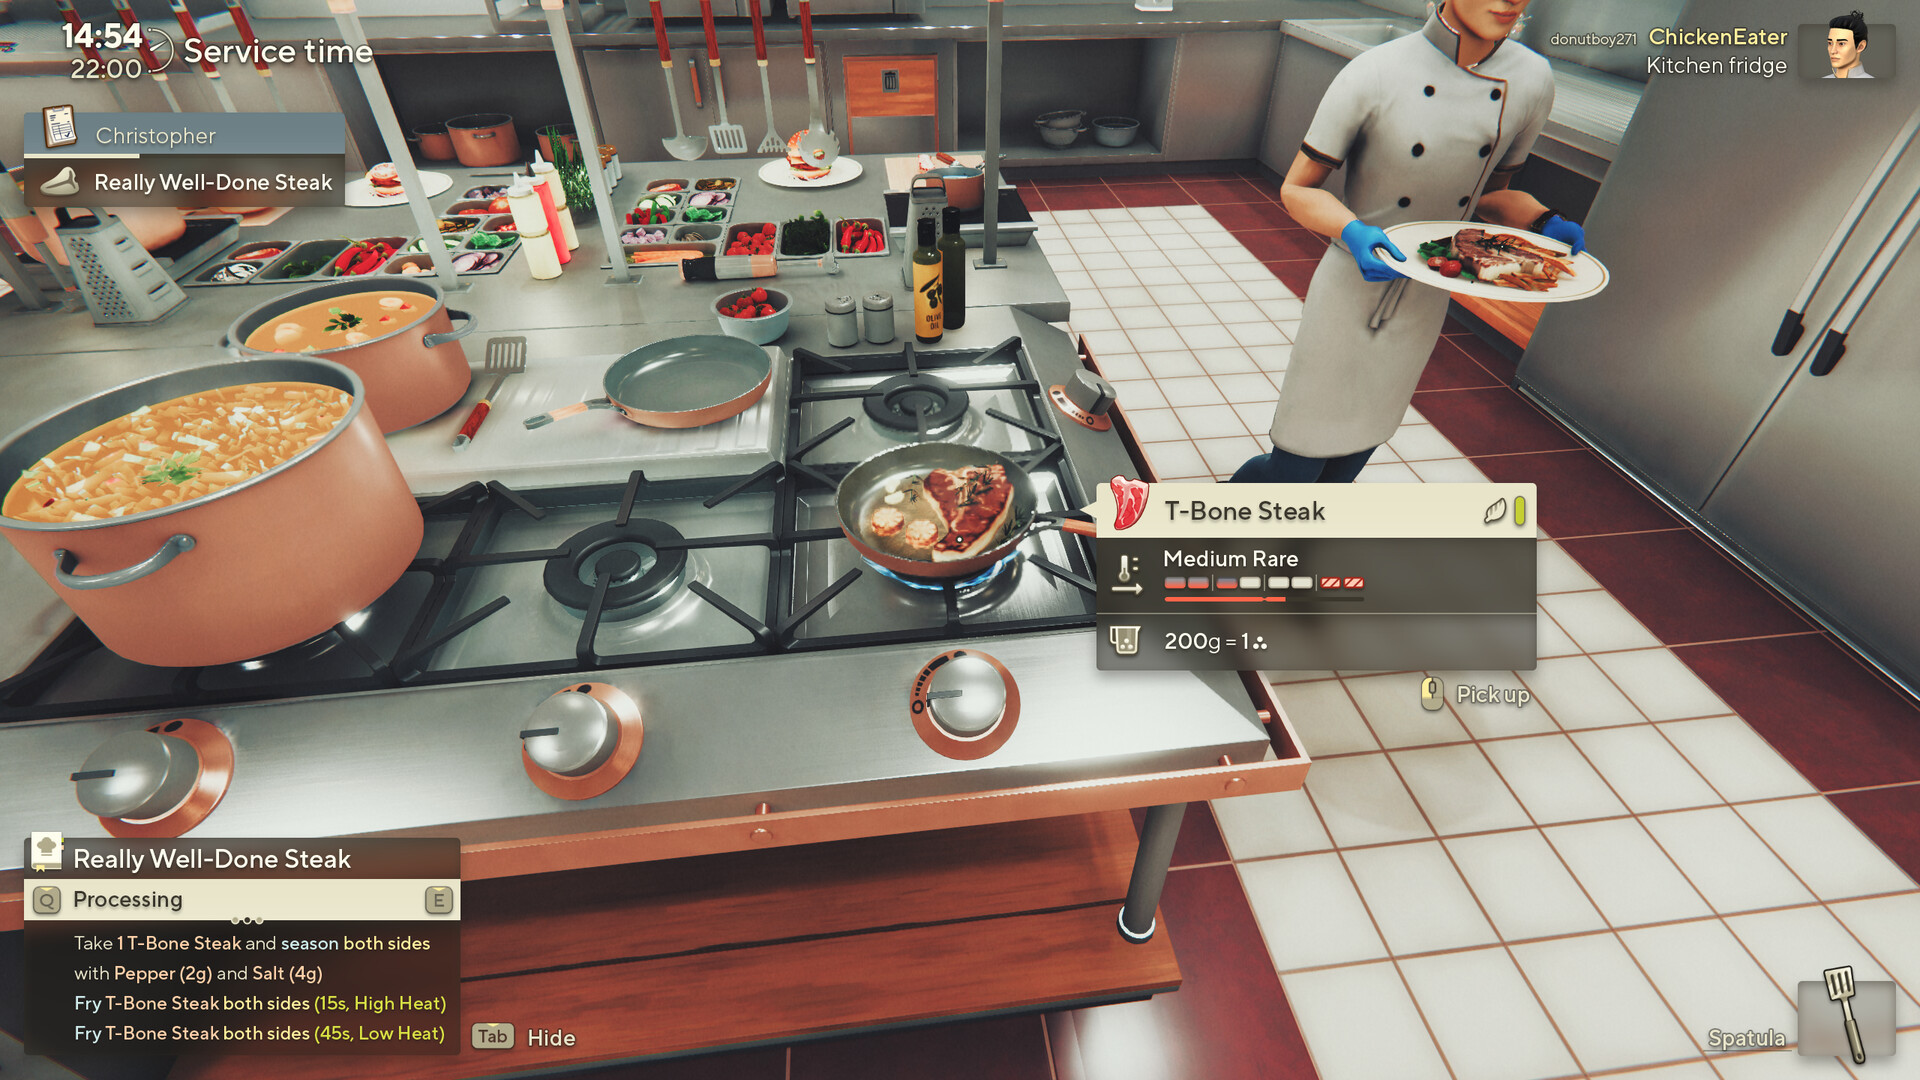 Cooking Simulator 2: Better Together will have online co-op :  r/CoopMultiplayerGames